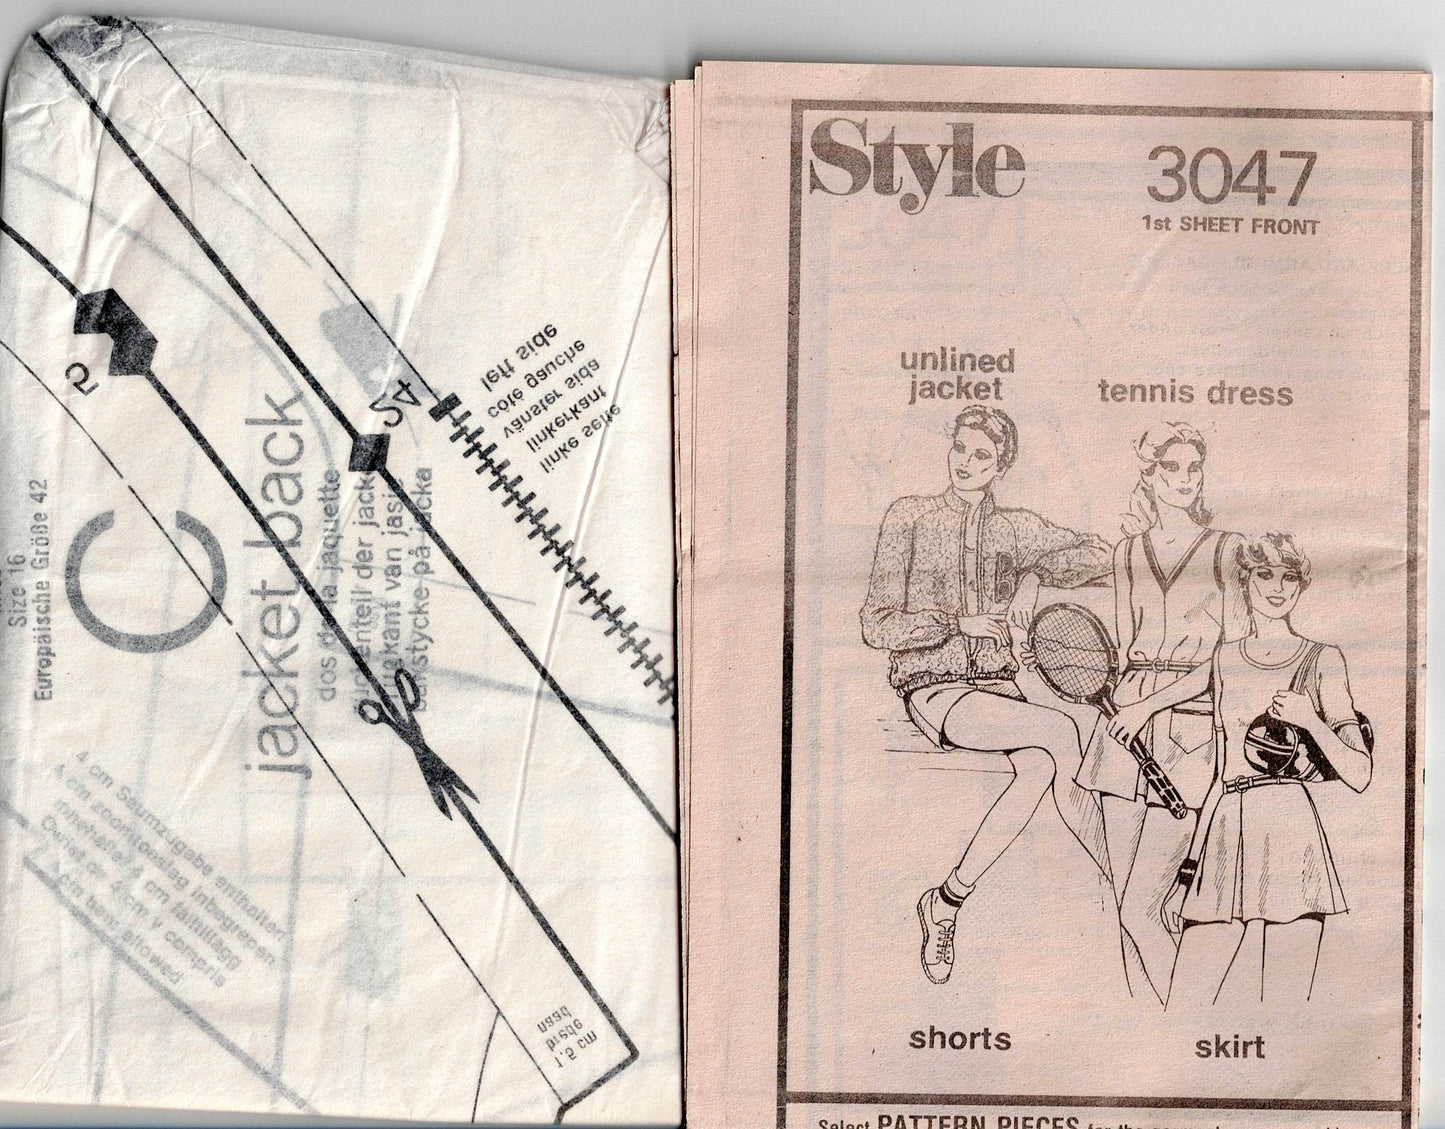 Style 3047 Womens Retro Tennis Outfit 1980s Vintage Sewing Pattern Size 16 Bust 38 inches